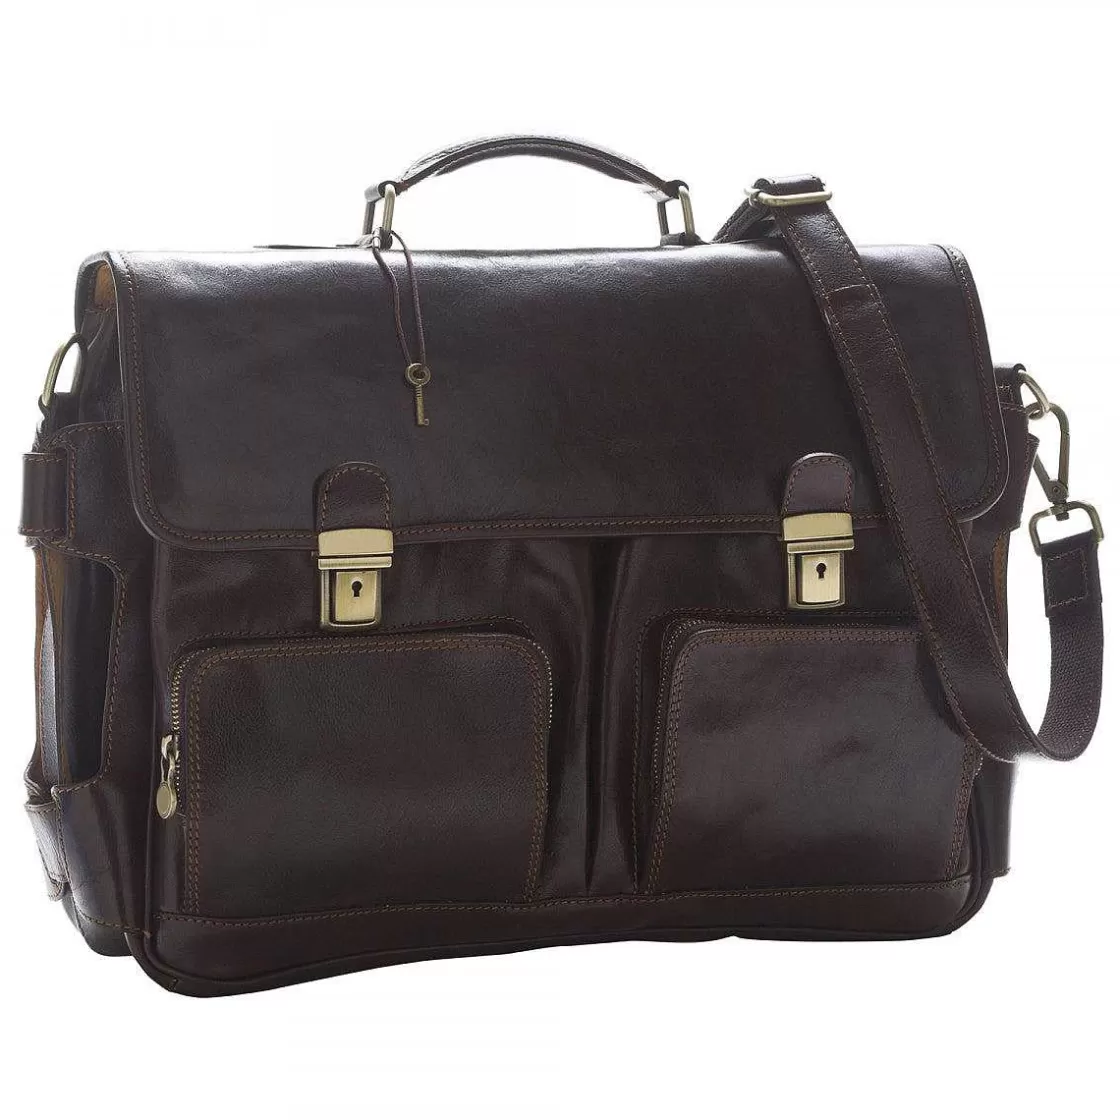 Leonardo Deluxe Briefcase In Full Grain Leather With Front Pockets And Adjustable Shoulder Strap Discount